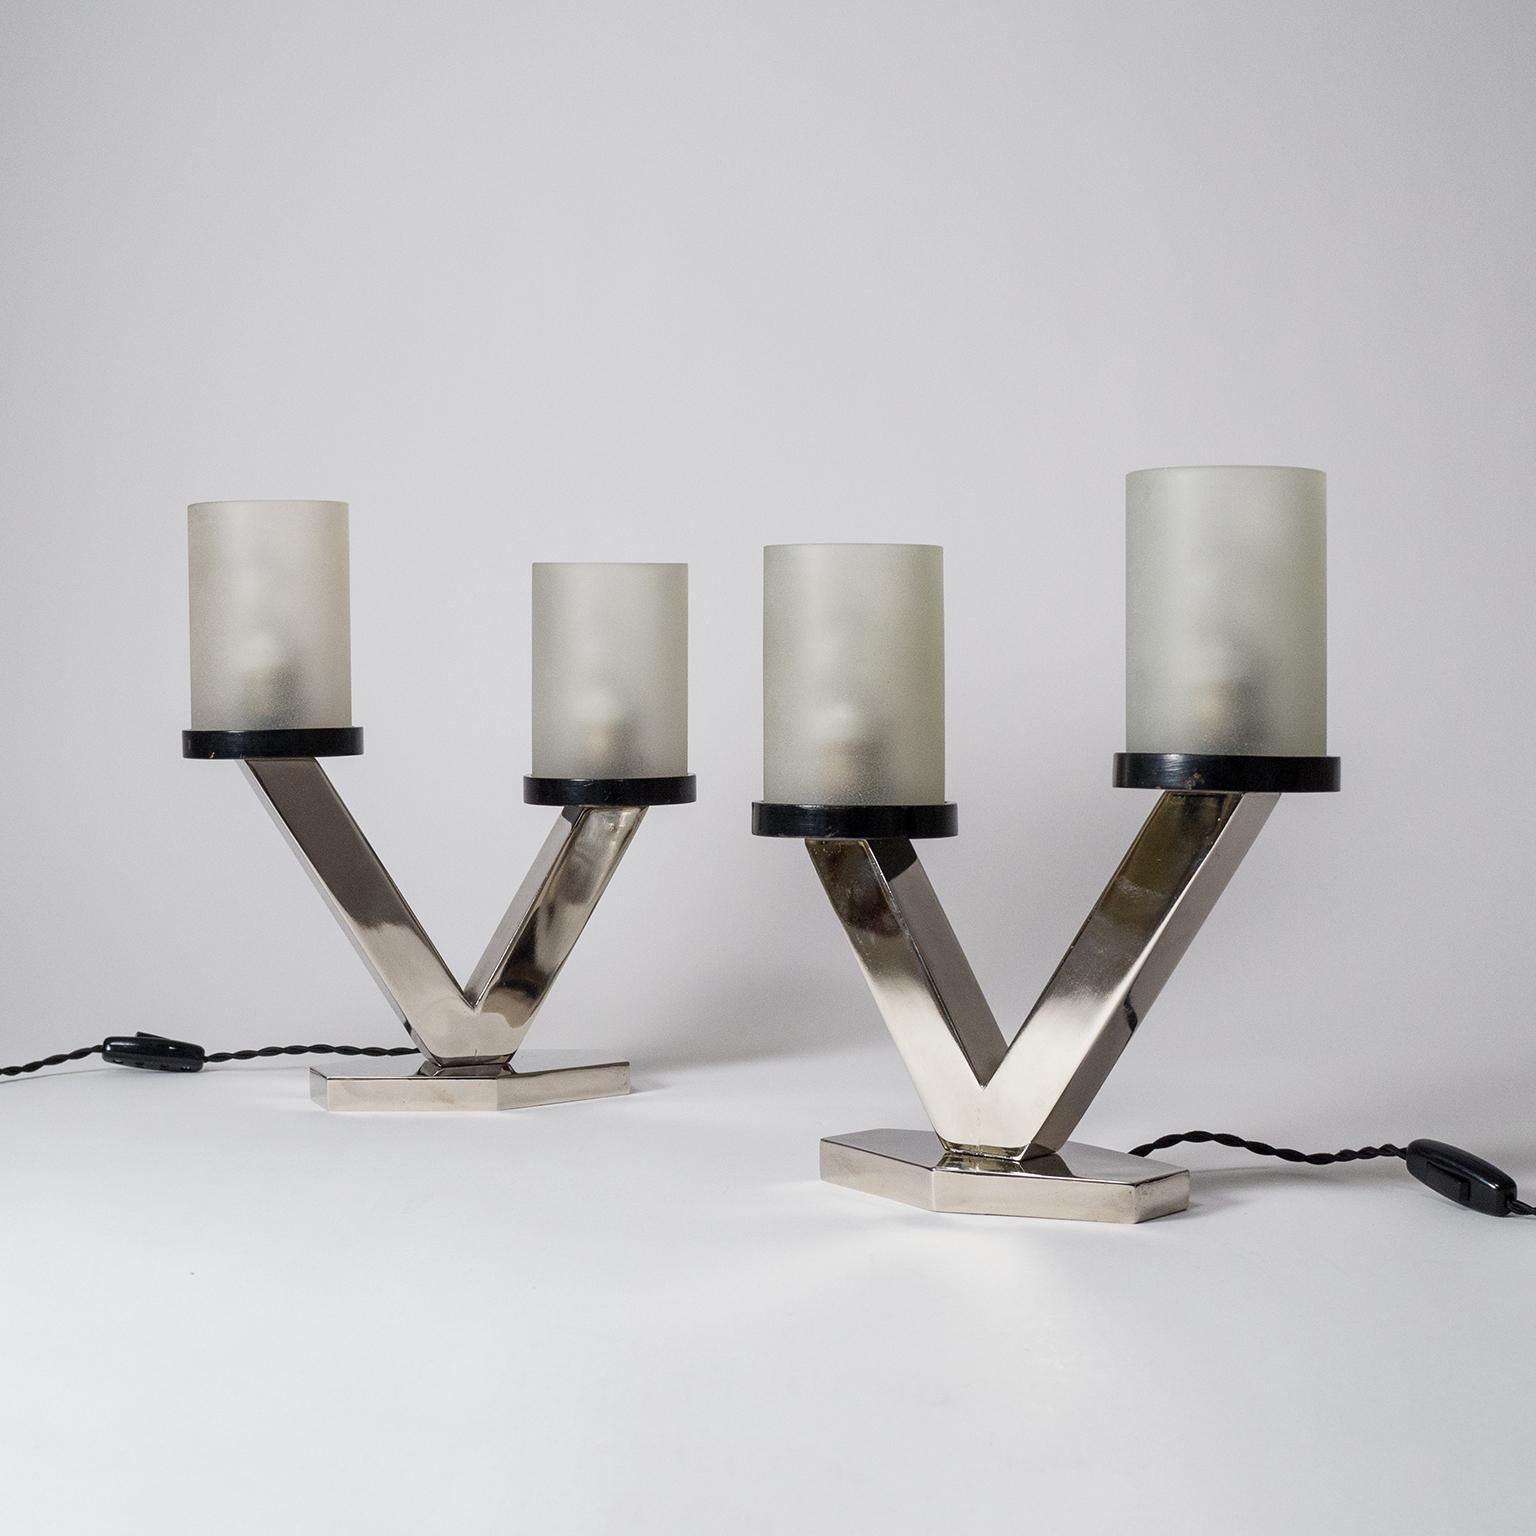 1920s Art Deco Table Lamps, Nickel and Glass 11